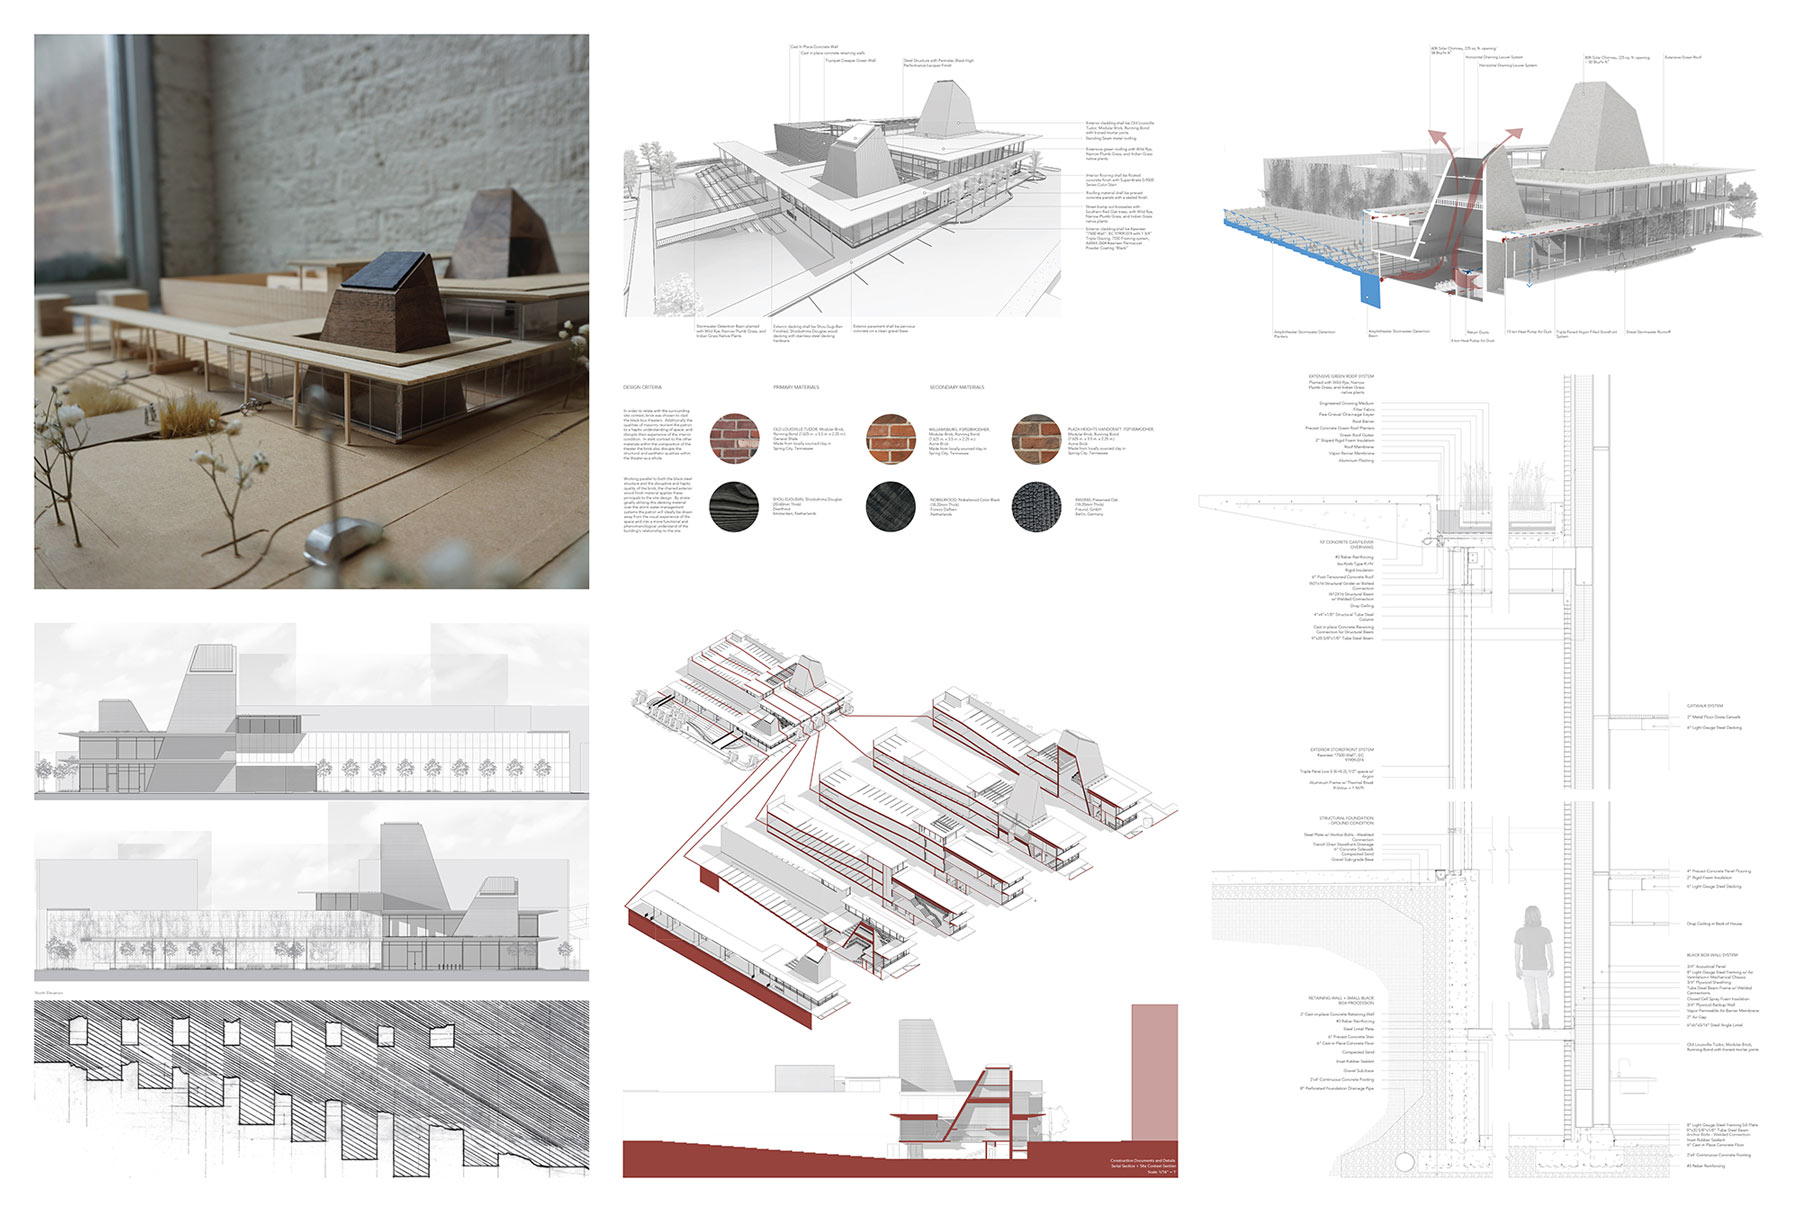 A collage filled with five different architectural blueprints, a pallet of 6 different types of bricks is showcased, and a photo of a room with wooden flooring, wooden benches, white brick walls, and a big window.